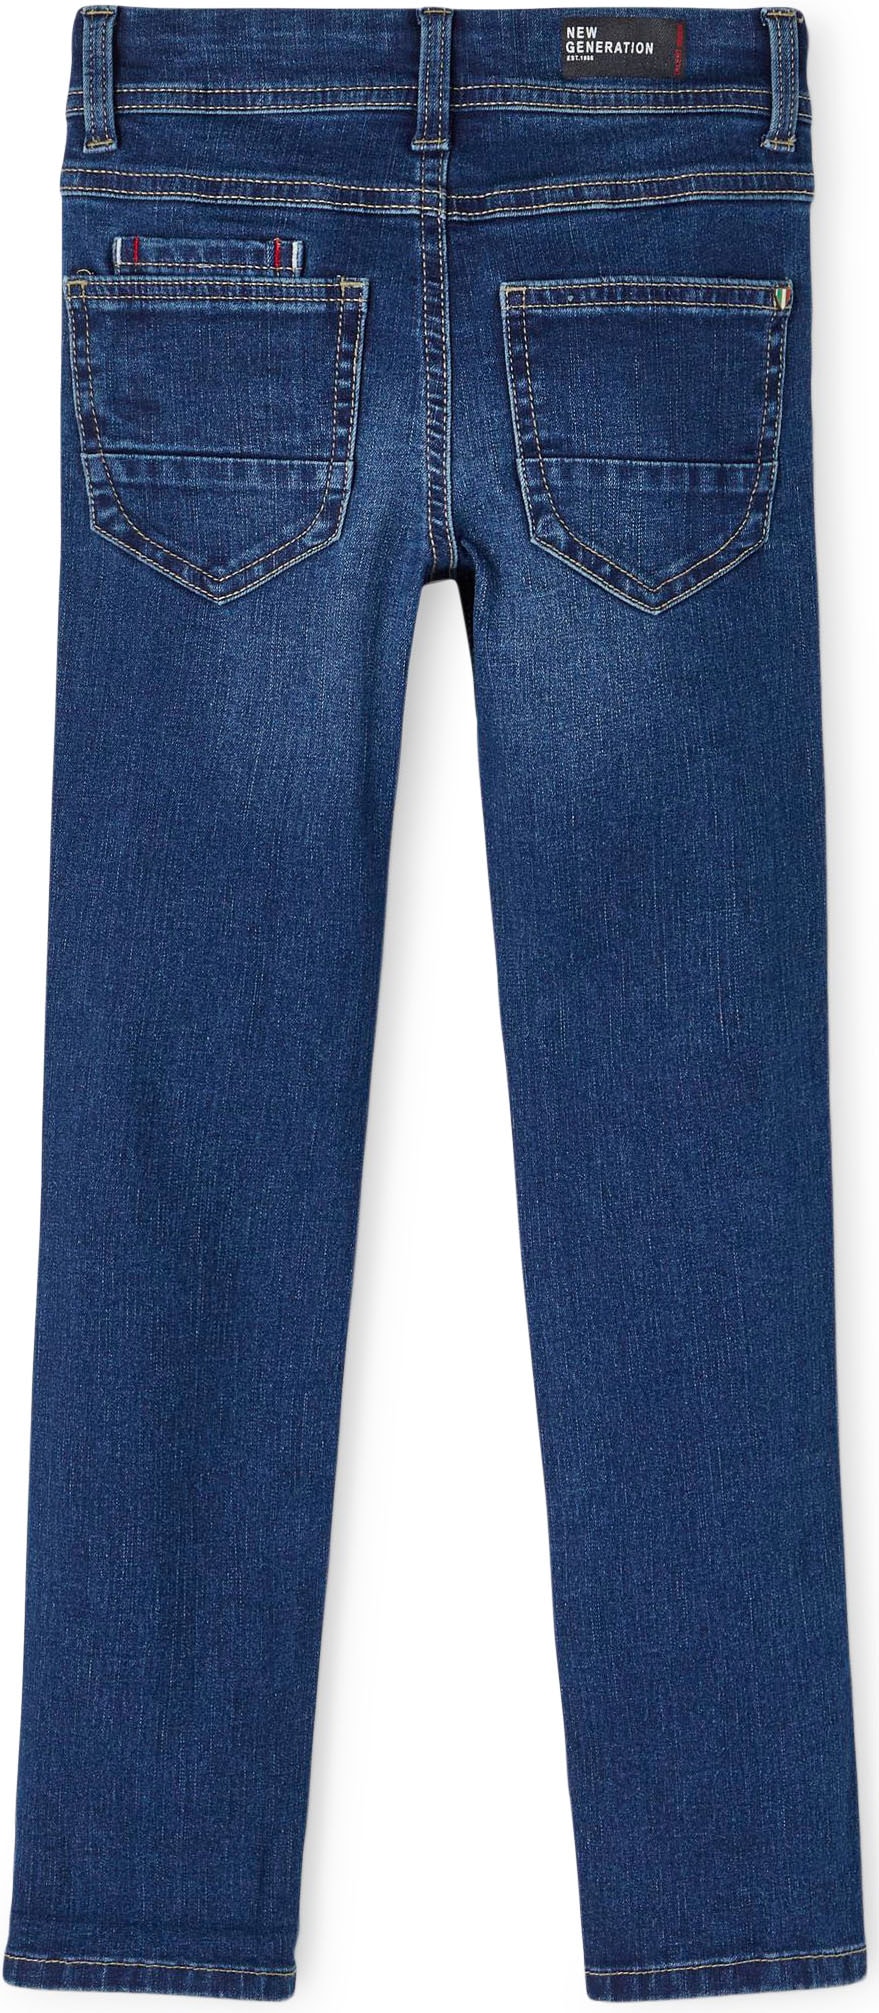 »NKMTHEO Name PANT« online Stretch-Jeans It 3618 DNMTAUL kaufen